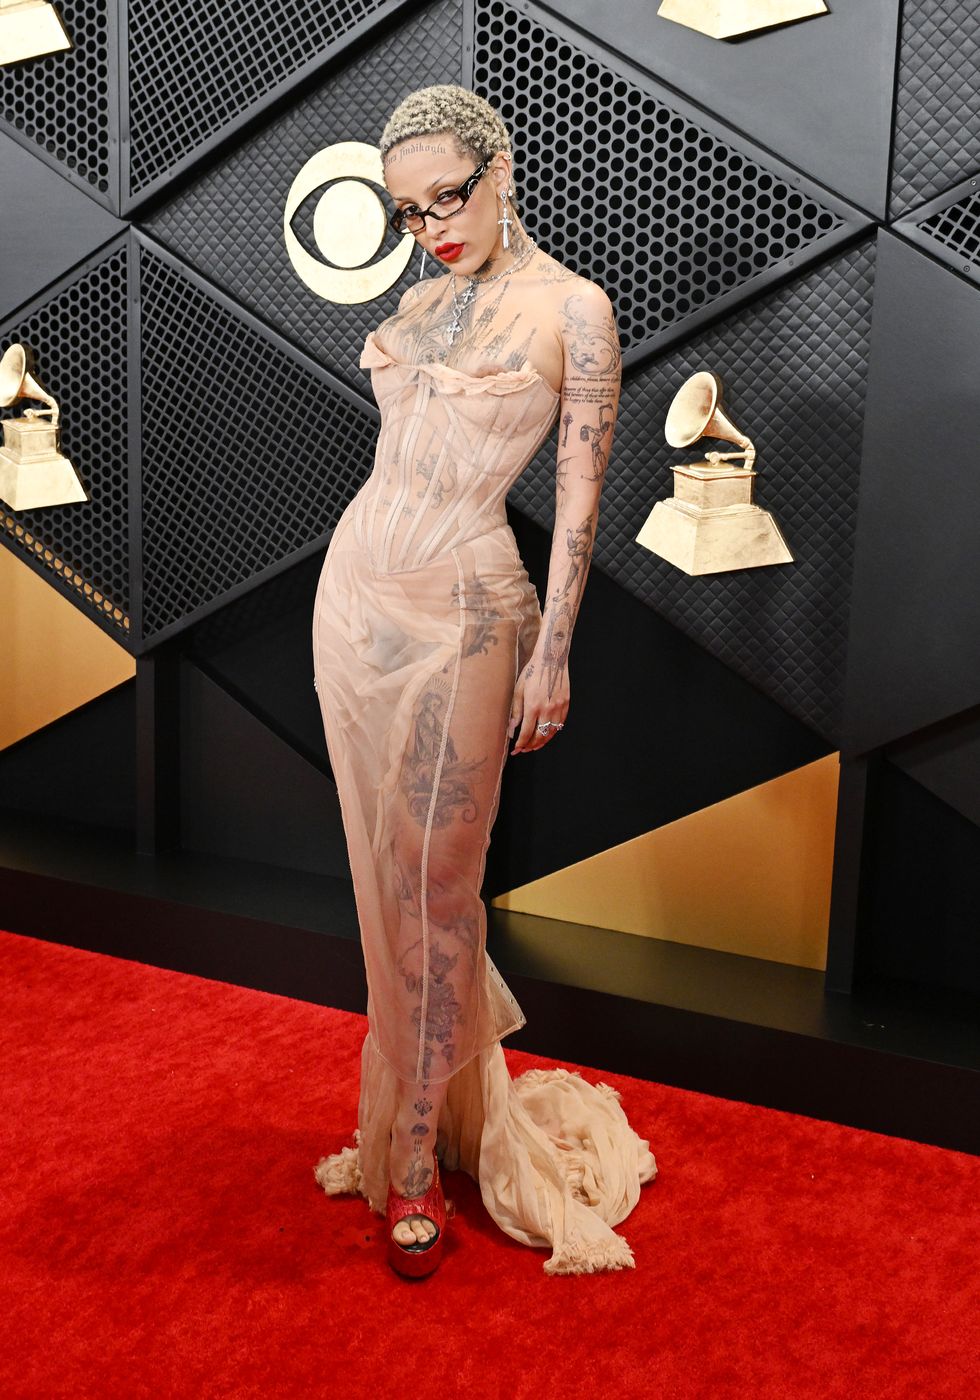 editors note image contains partial nudity doja cat at the 66th annual grammy awards held at cryptocom arena on february 4, 2024 in los angeles, california photo by gilbert floresbillboard via getty images